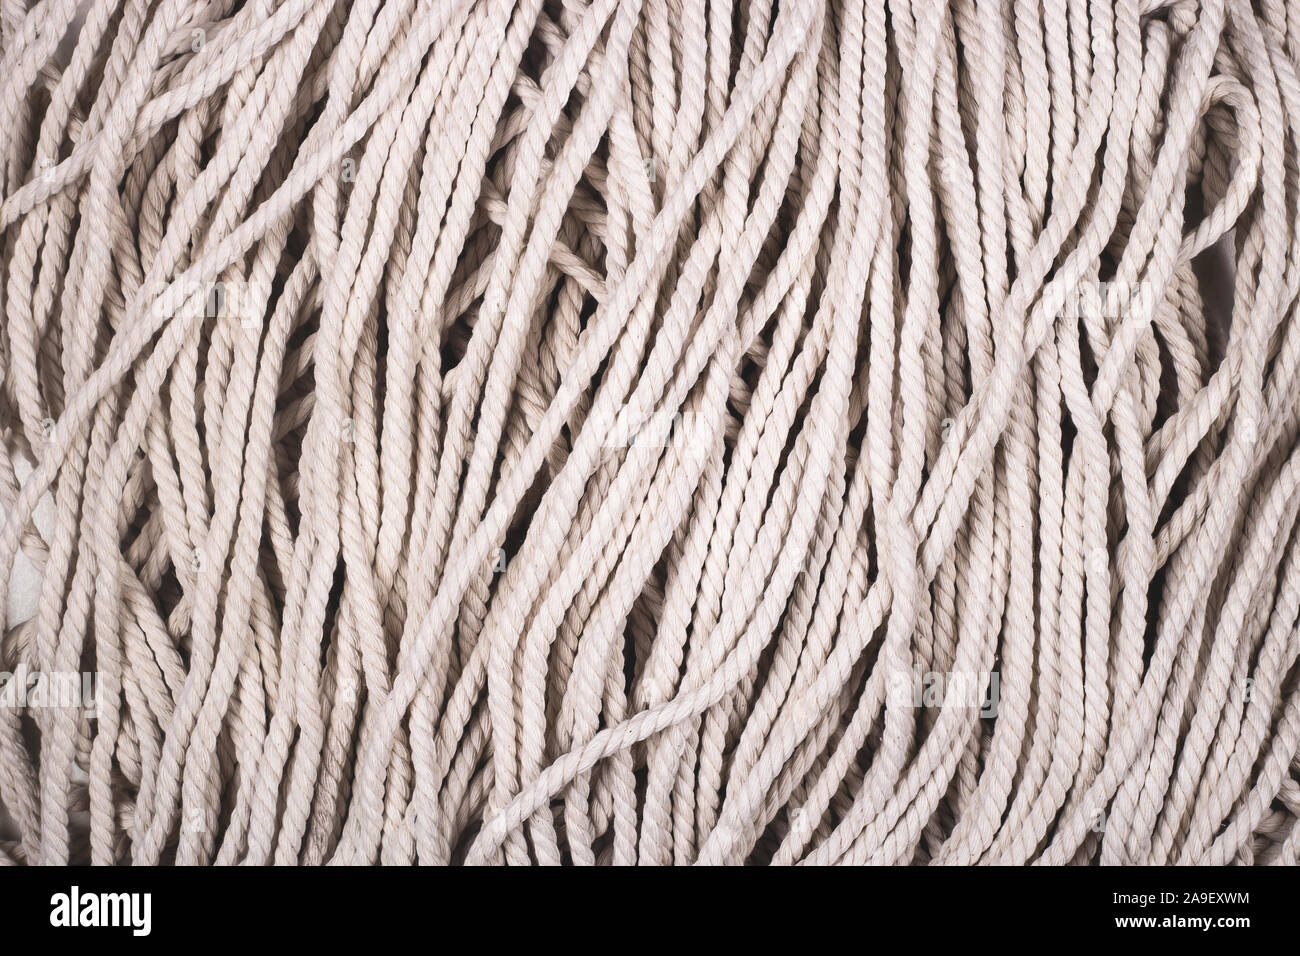 Cotton white rope texture as natural material and background with